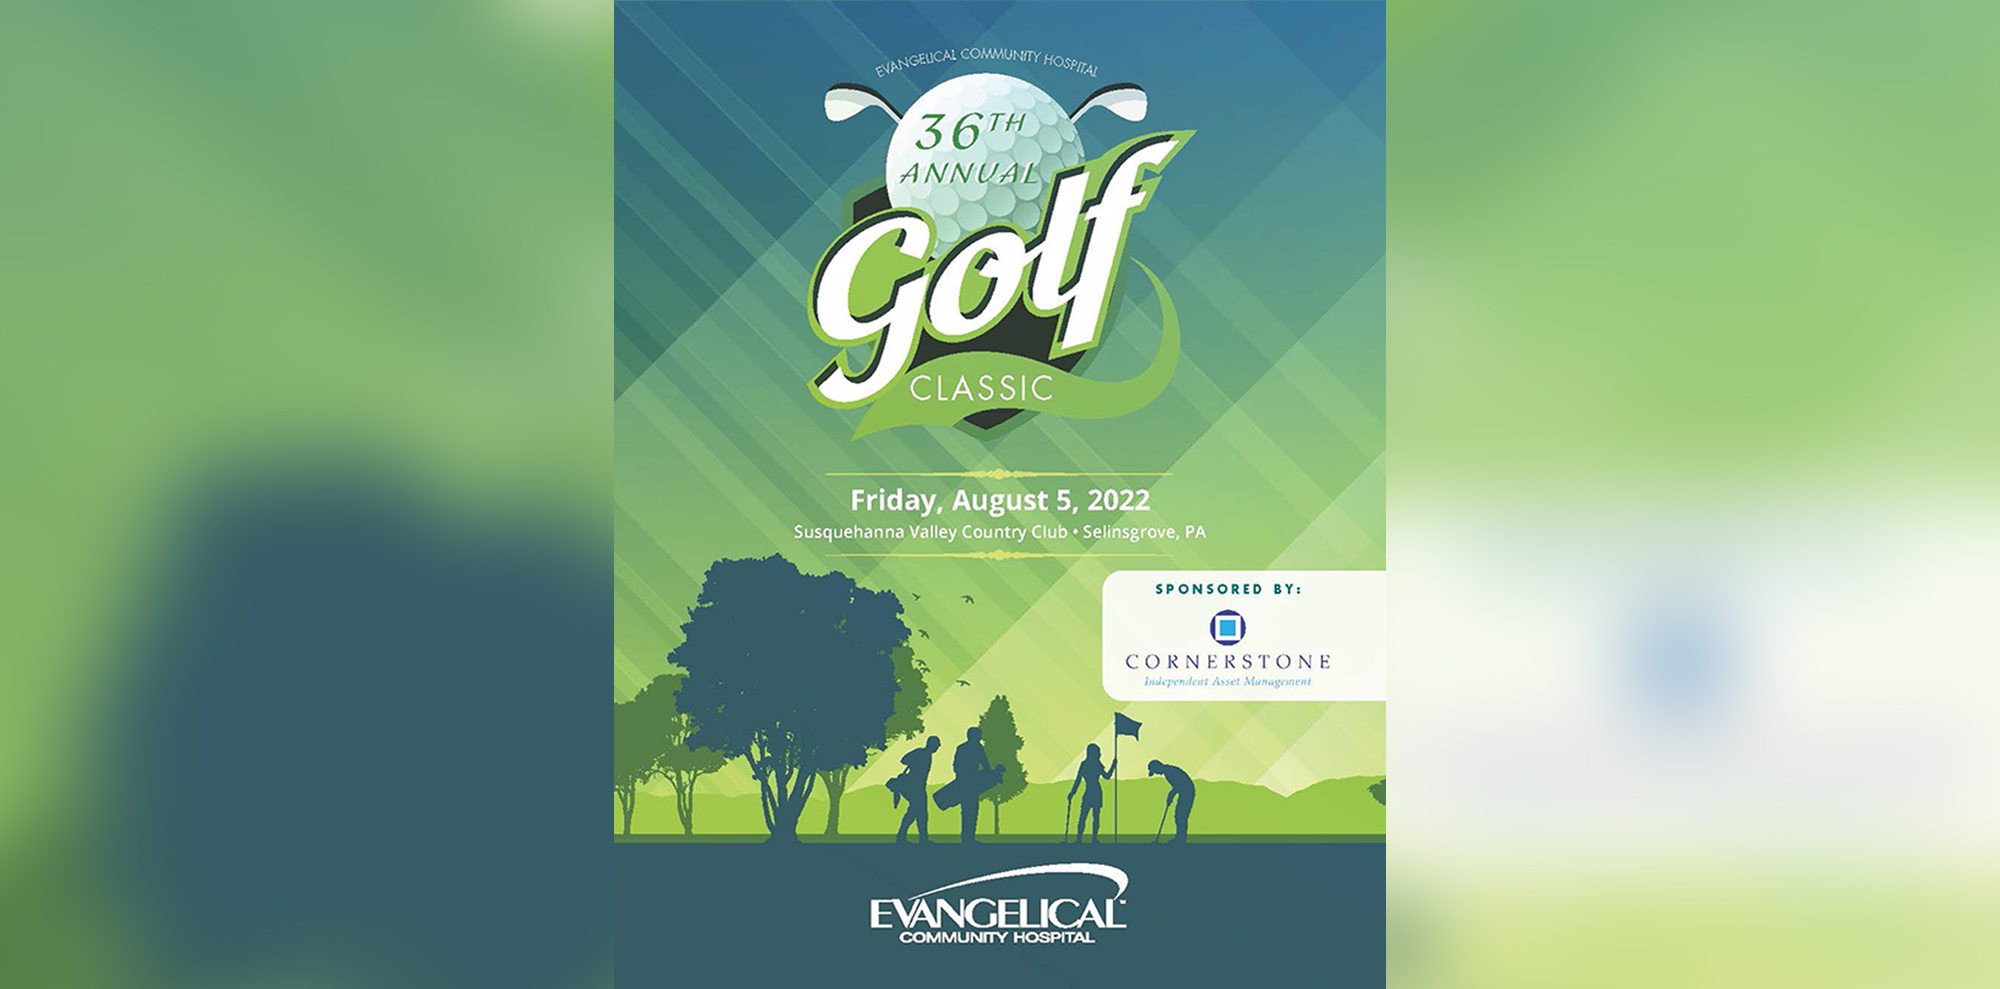 Evangelical Invites Golfers and Sponsors to Take Part in 36th Annual Golf Classic 